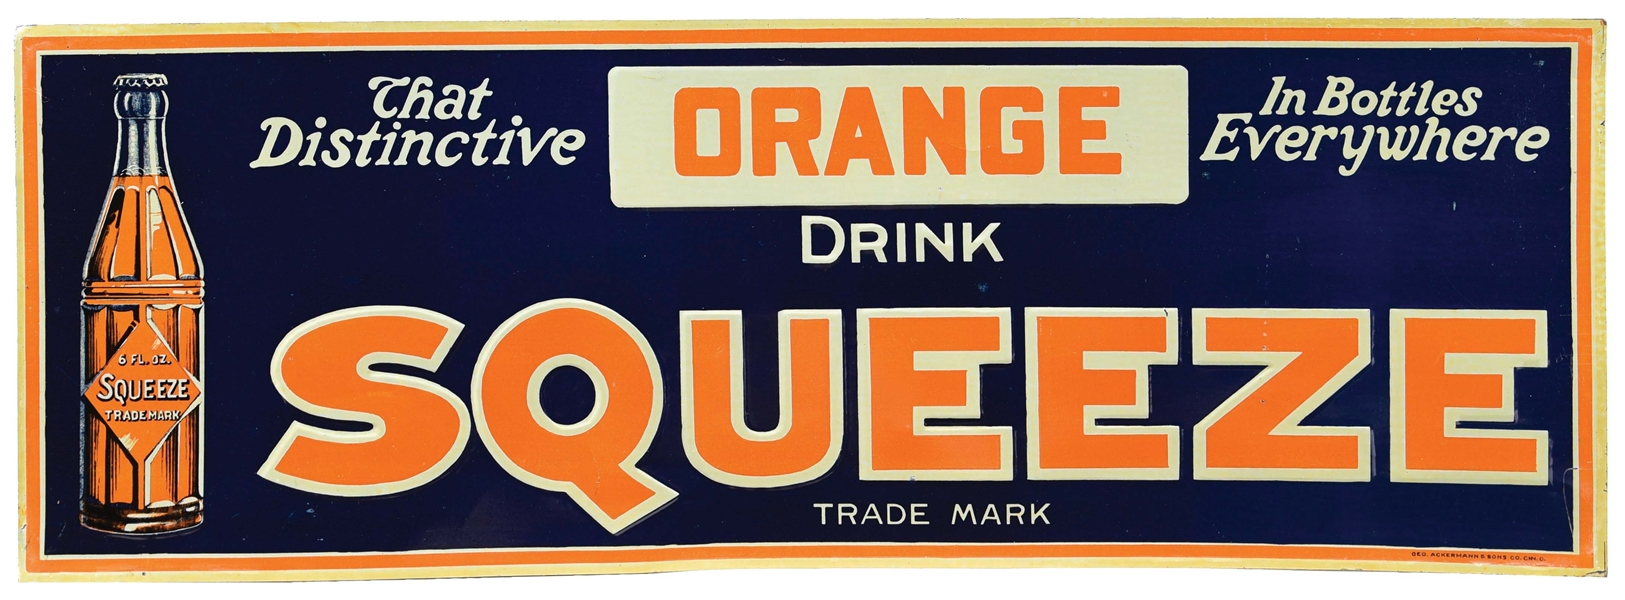 DRINK SQUEEZE ORANGE SODA IN BOTTLES TIN LITHOGRAPH W/ BOTTLE GRAPHIC..